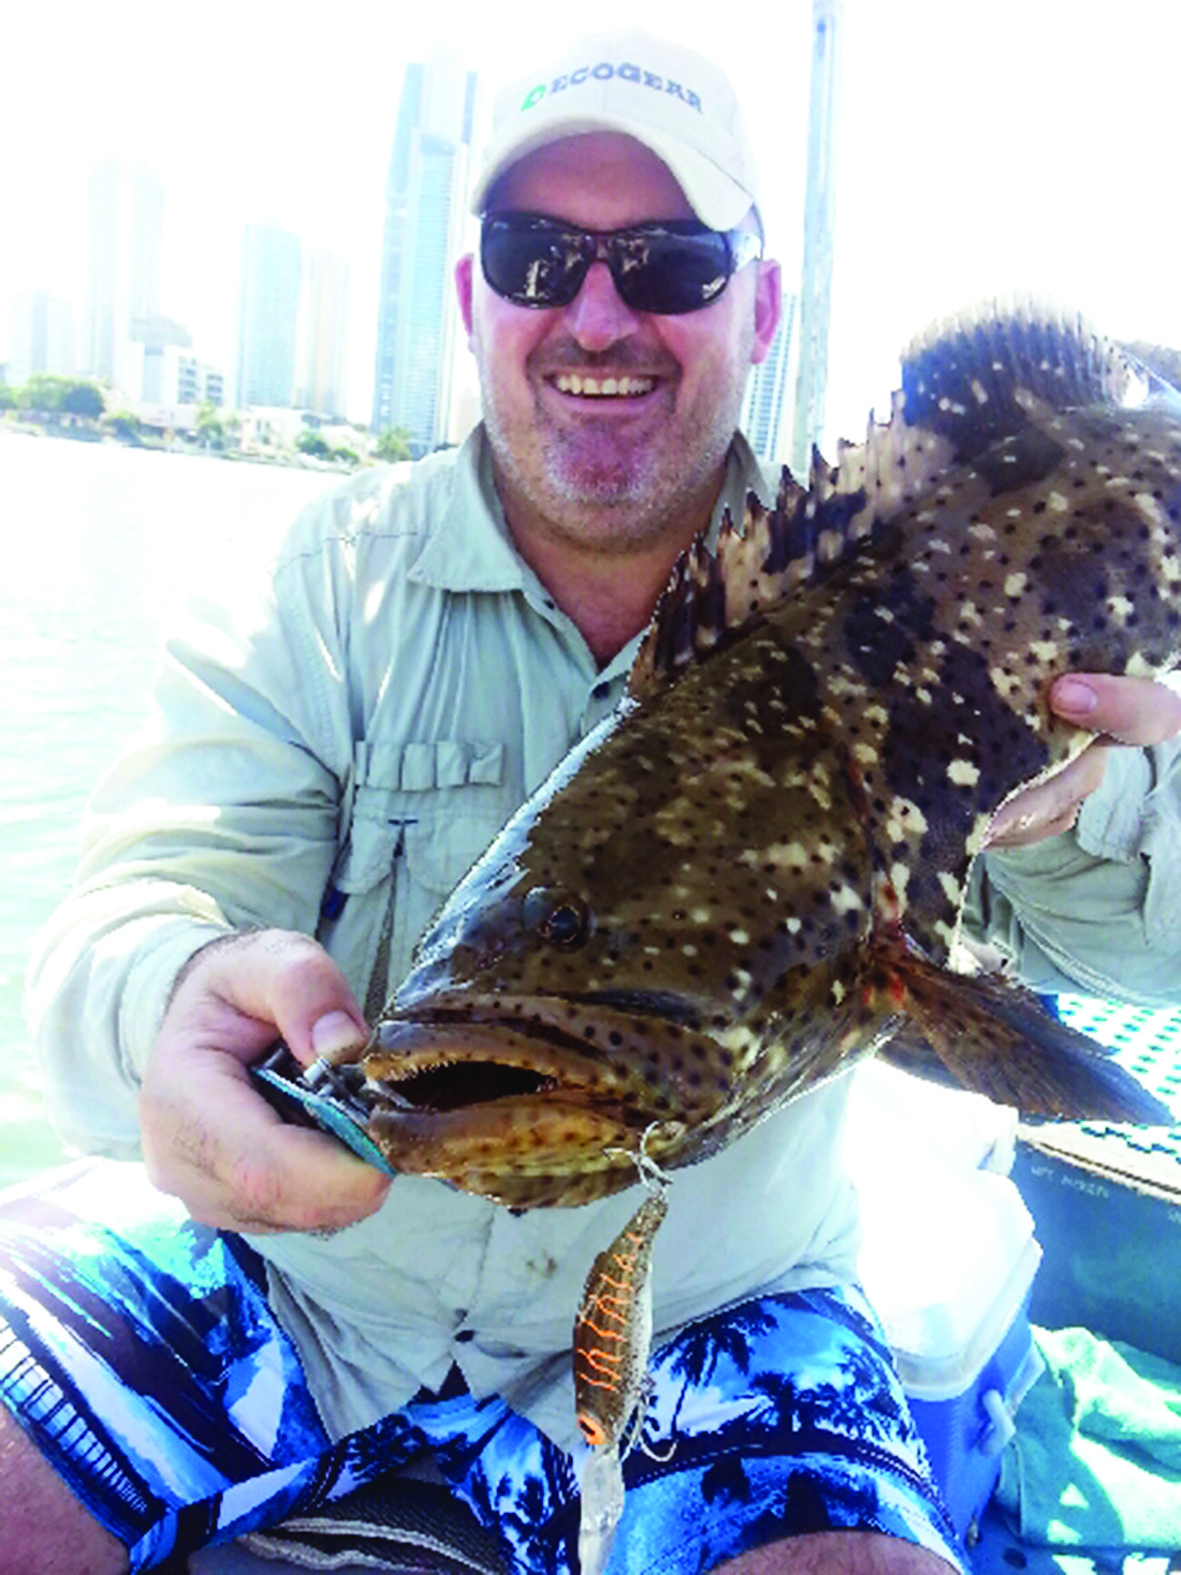 Ian Ellis with a big smile and a pretty solid estuary cod hooked on an Atomic lure while targeting mangrove jack.